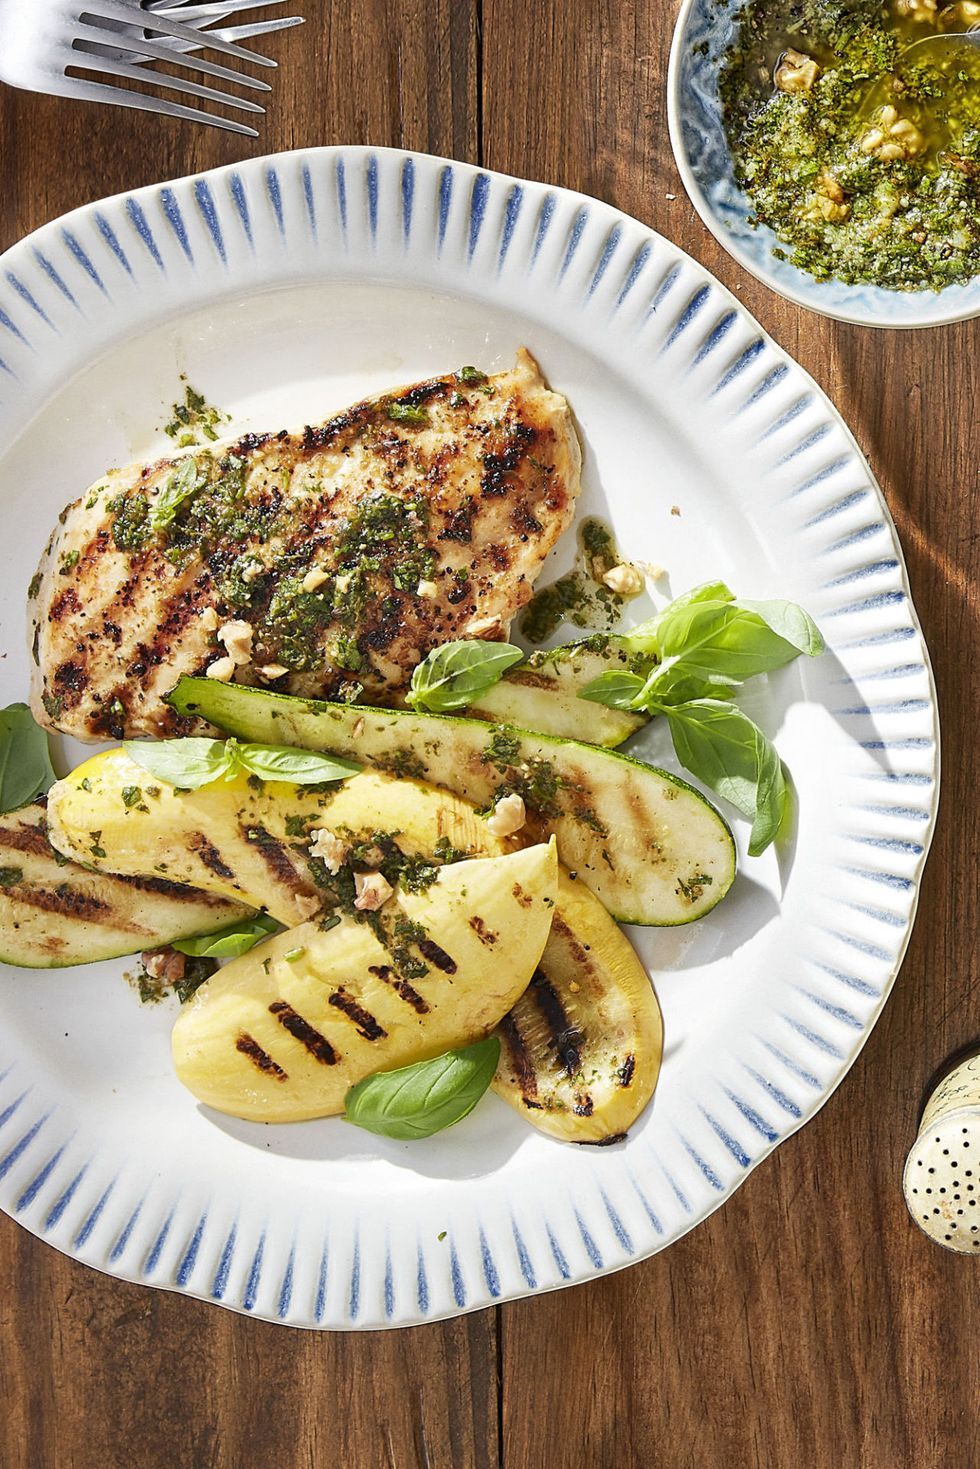 50 Best Grilled Chicken Breast Recipes Easy Chicken On The Grill Ideas